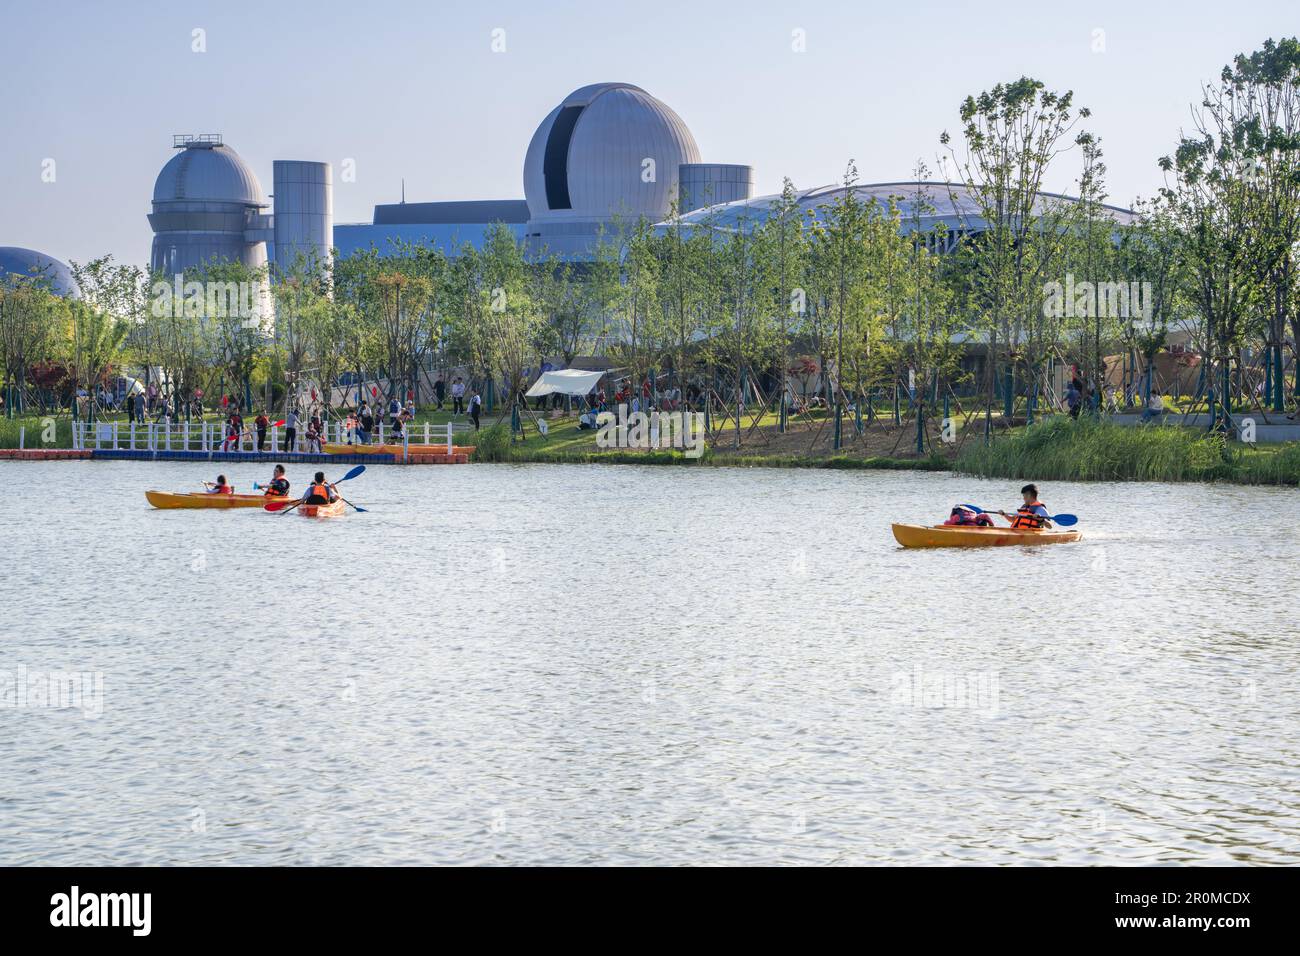 Kayakers on the Chunlian River in front of the Shanghai Astronomy Museum in Lingang, Pudong New Area, Shanghai, China. Stock Photo